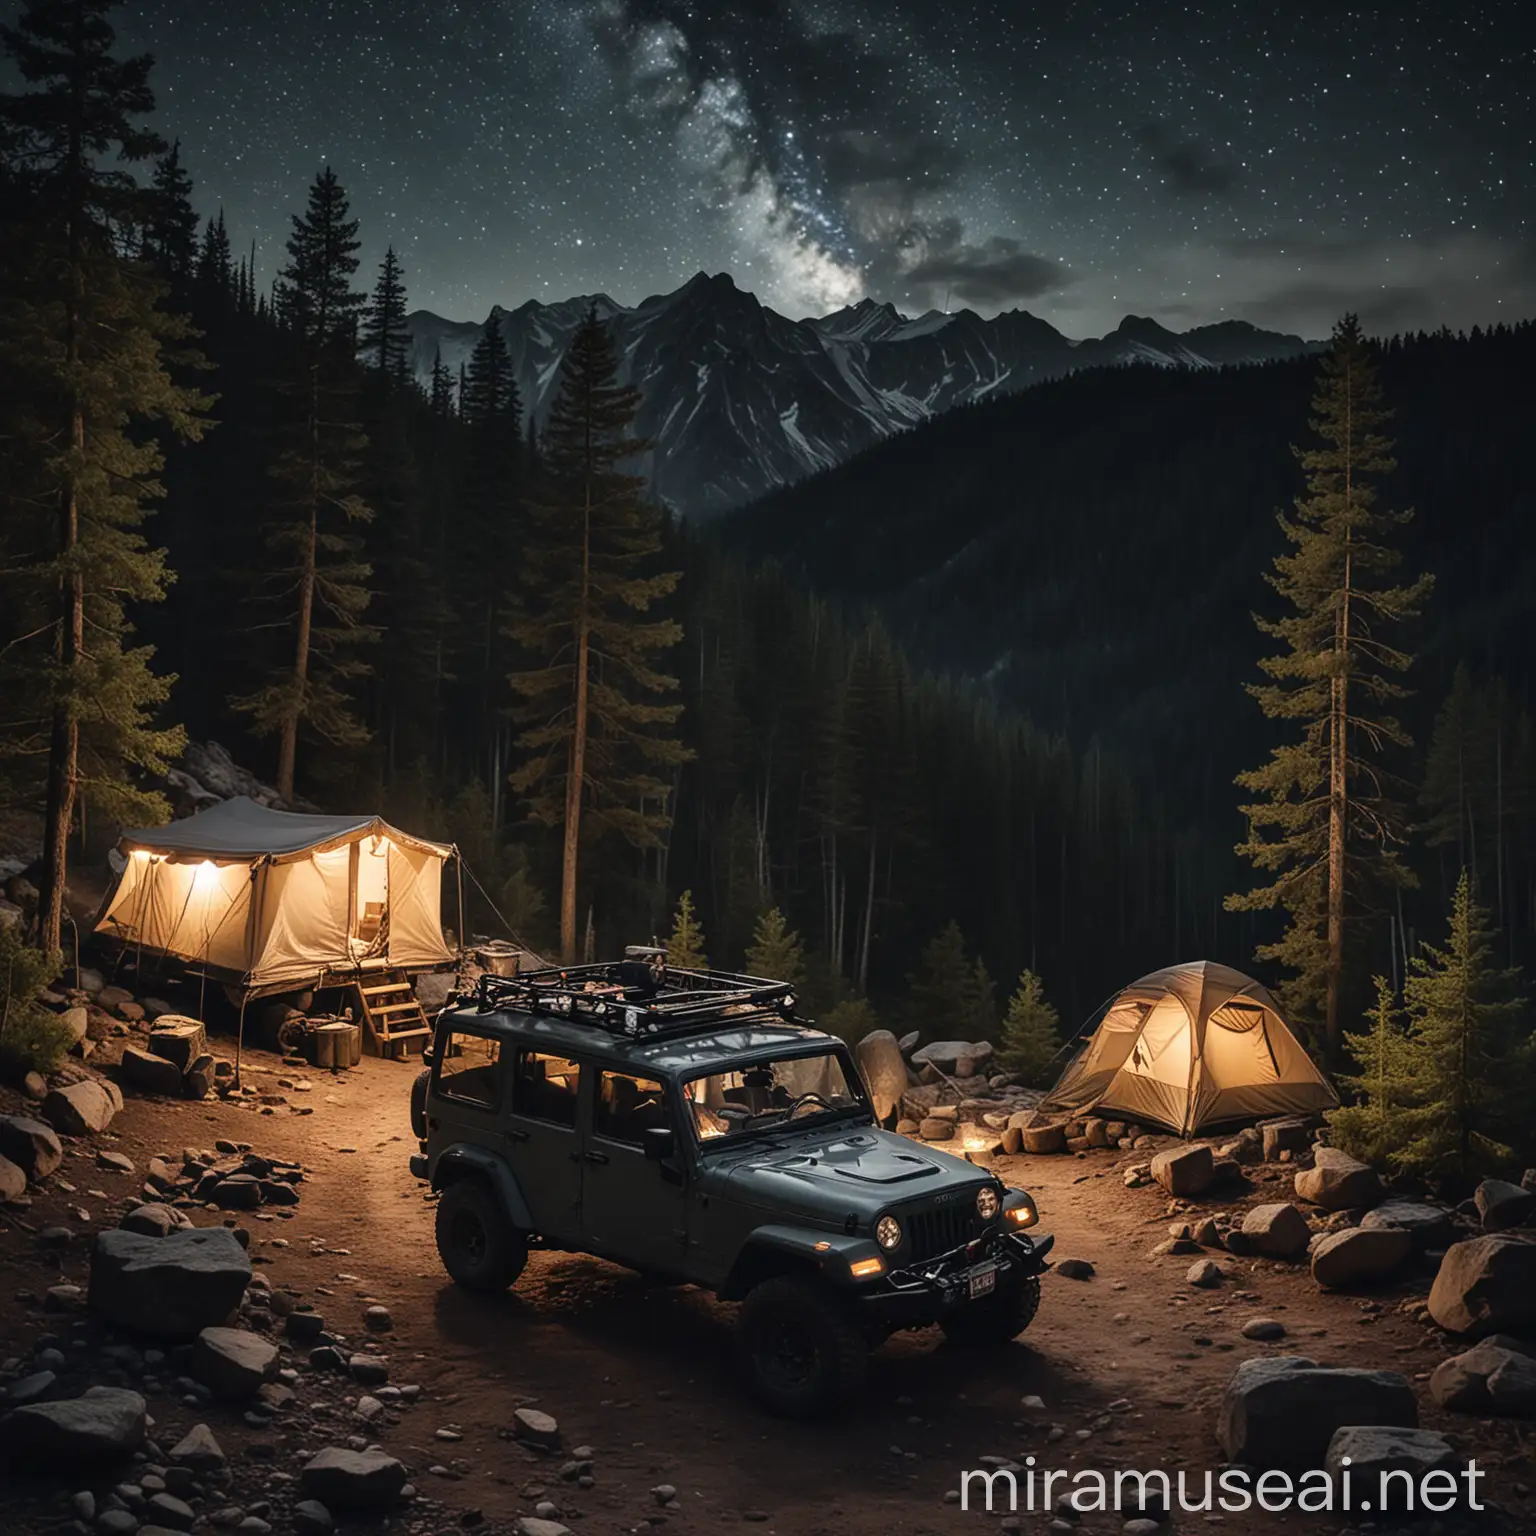 Jeep Camping in the Mountain Wilderness at Night